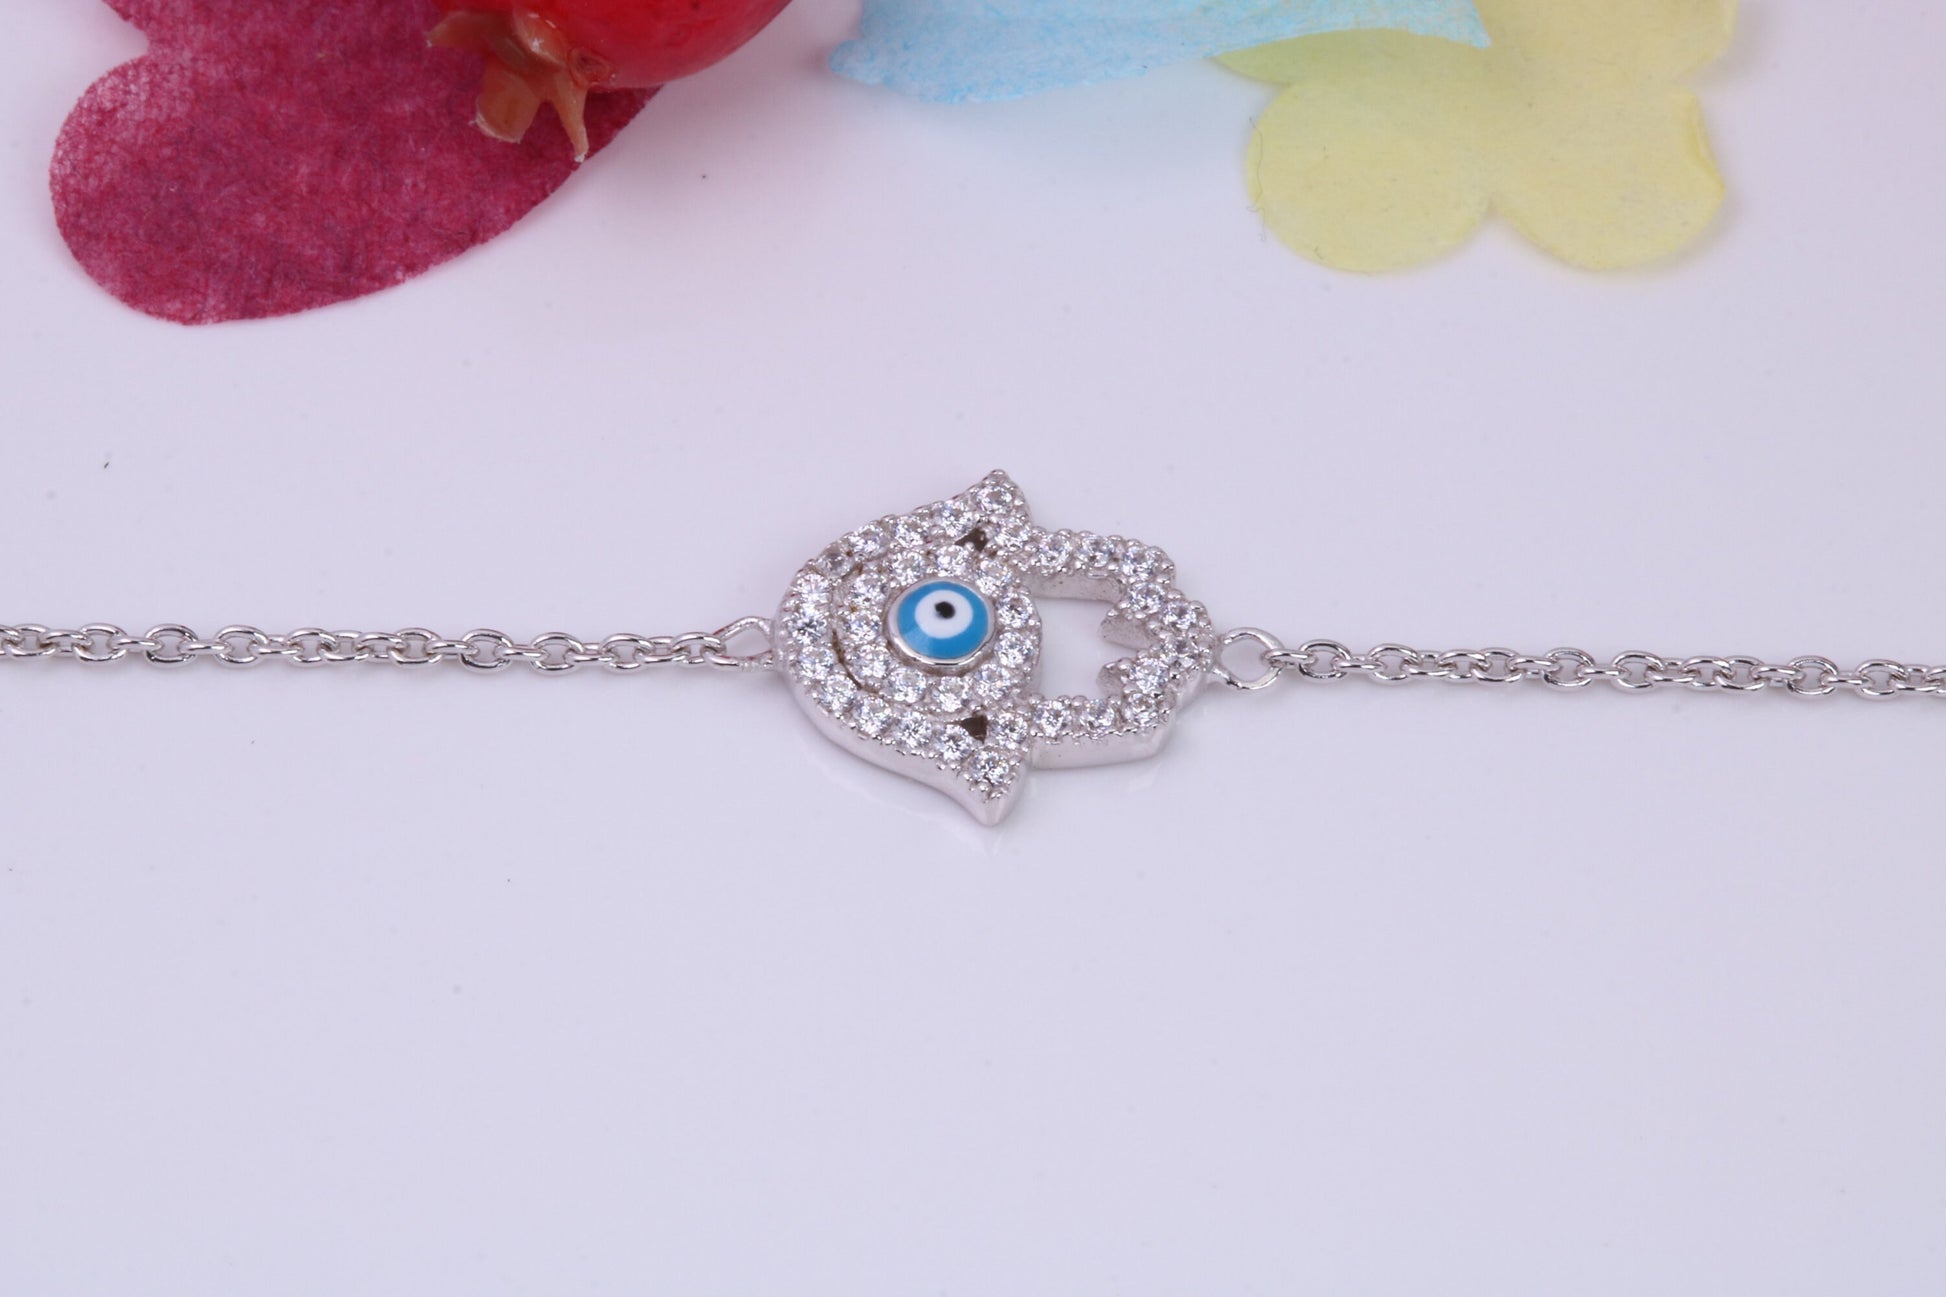 Evil Eye Protector Bracelet with Length Adjustable Chain, Made from solid Sterling Silver